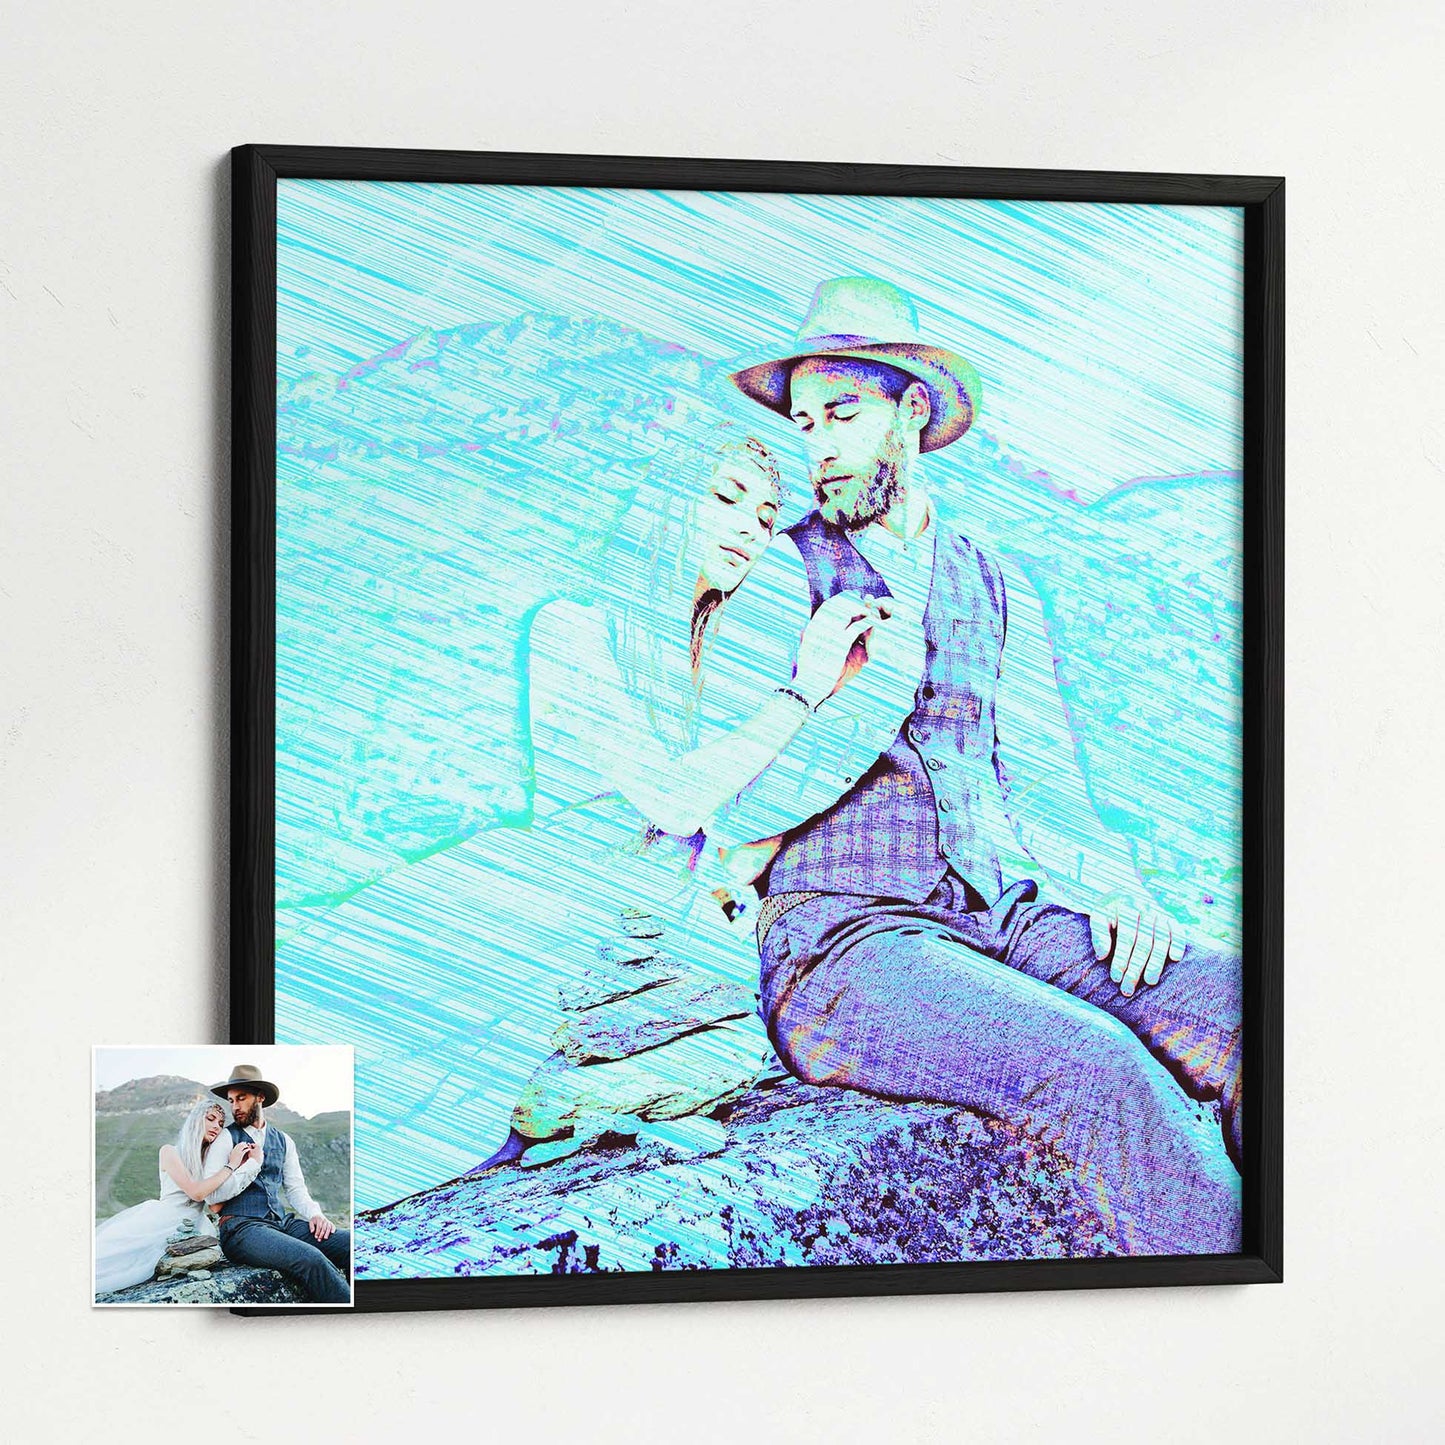 Personalised Blue Drawing Framed Print: Infuse your space with creativity and style. The pencil effect gives this artwork a cool and unique vibe, making it a fresh and original addition to your home or office decor